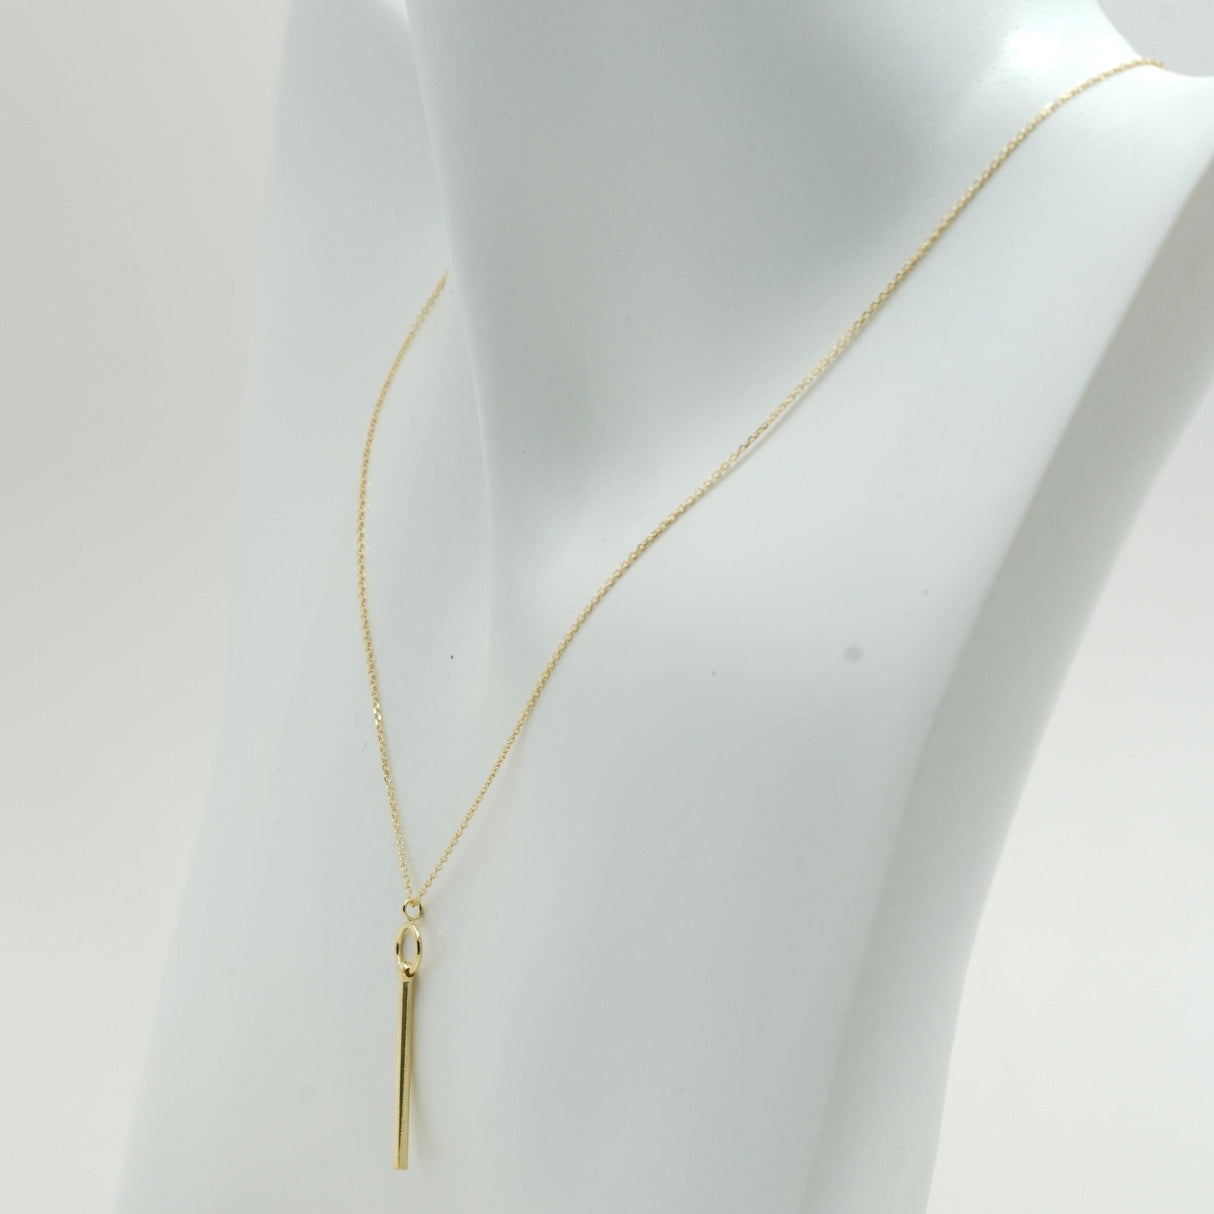 14K Gold Necklace, Adjustable Tube Necklace, Fashion and Trendy Necklace,  Add timeless fashion to any ensemble with this 14K Gold Necklace from Diamond Origin. An adjustable tube design makes it easy to wear, and its classic yet trendy style ensures that you look chic and fashionable wherever you go. Ideal for layering and gifting, it's sure to make a beautiful addition to any jewelry collection.  Elegant and fashionable stackable gold necklace, trendy gold necklace for all occasions gift,